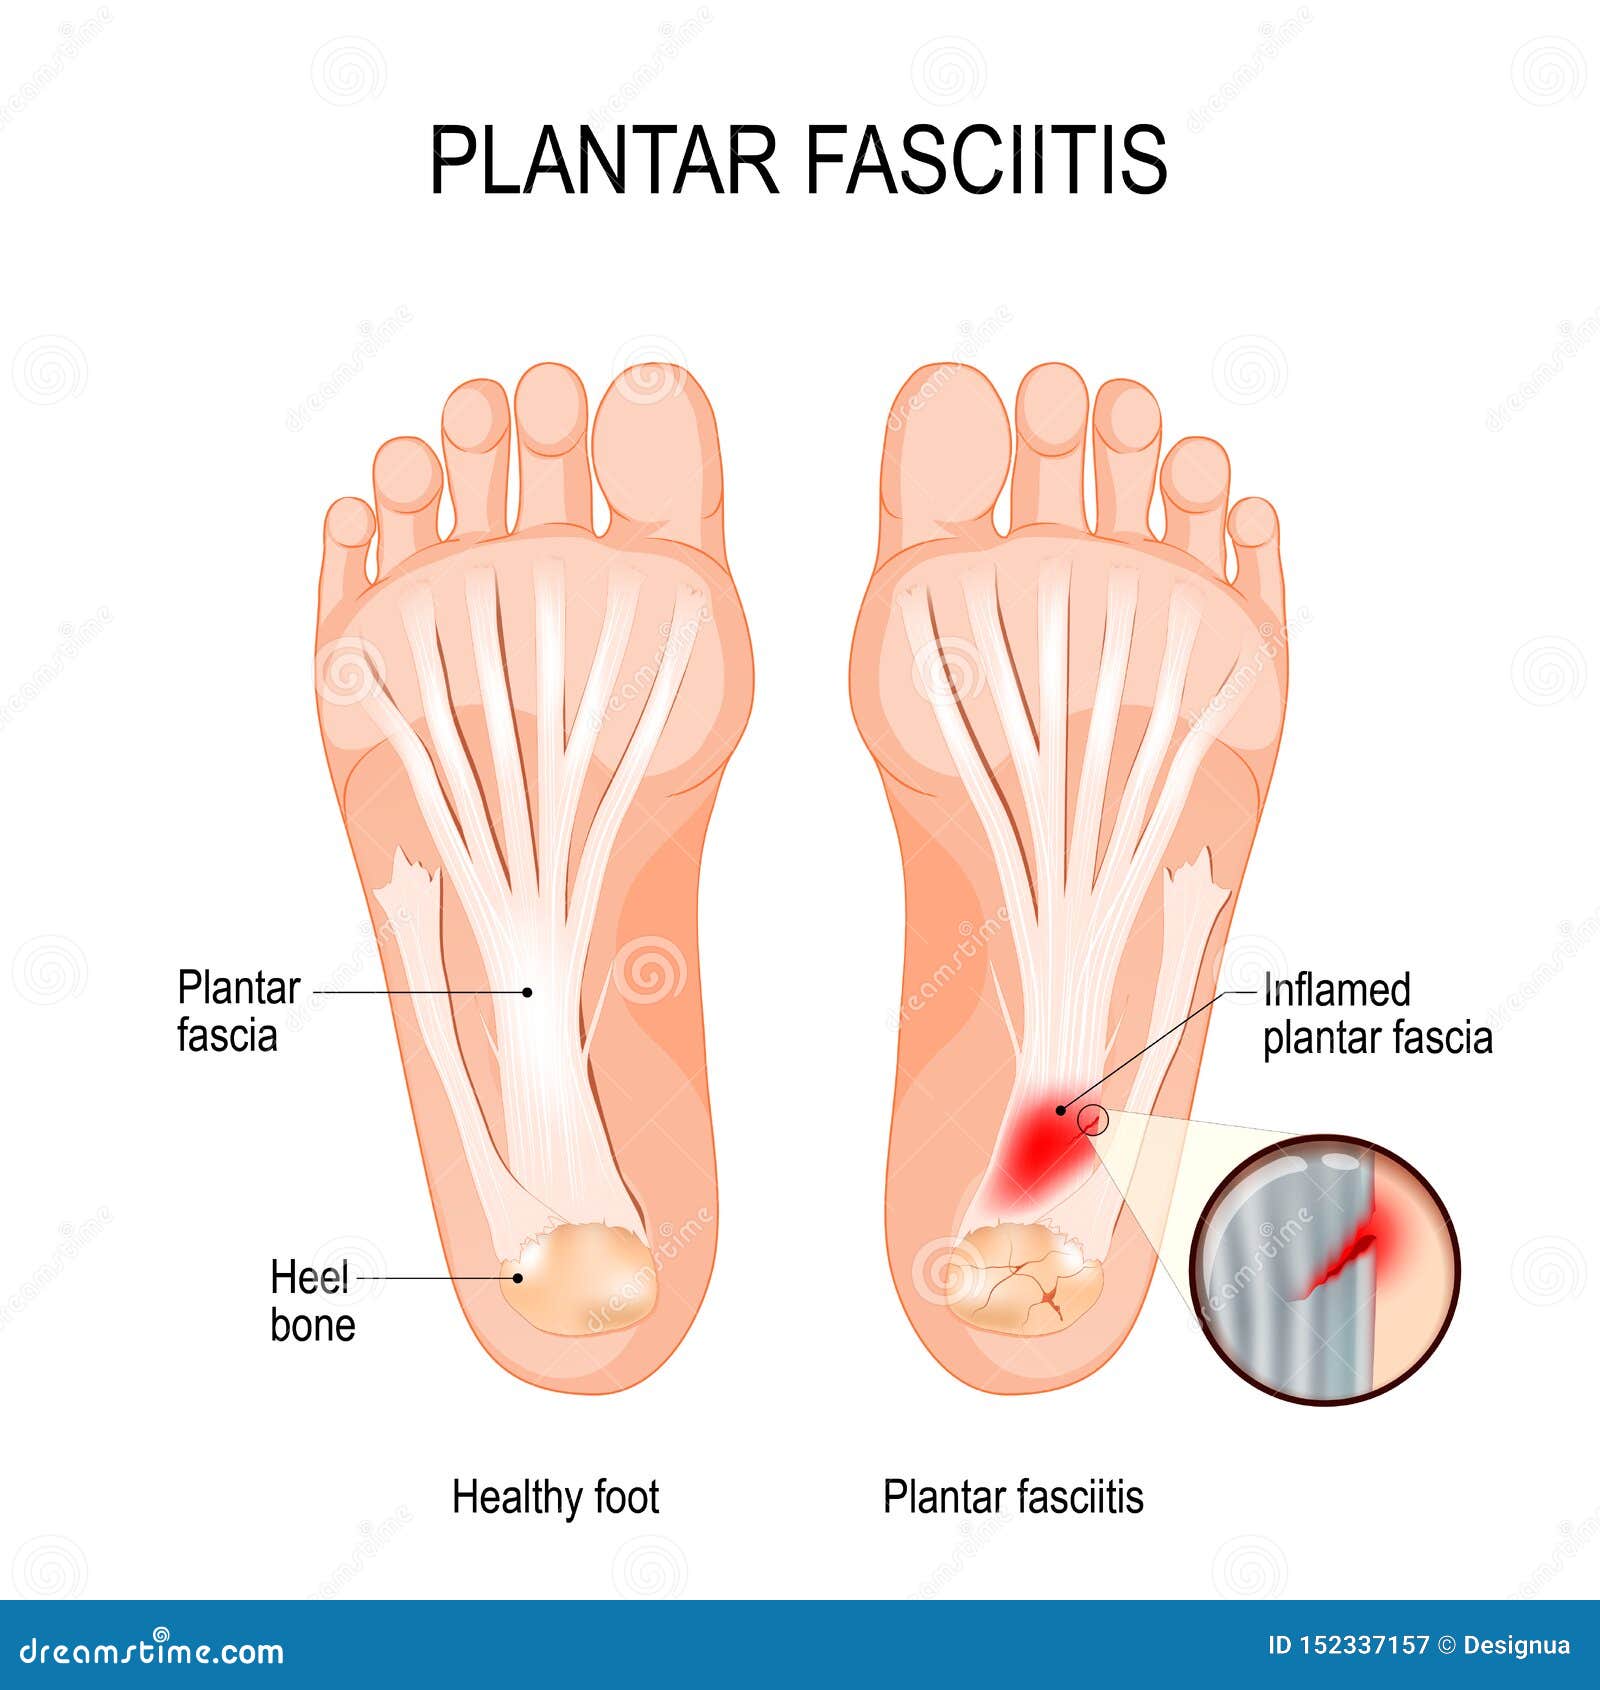 plantar fasciitis. disorder of the connective tissue which supports the arch of the foot